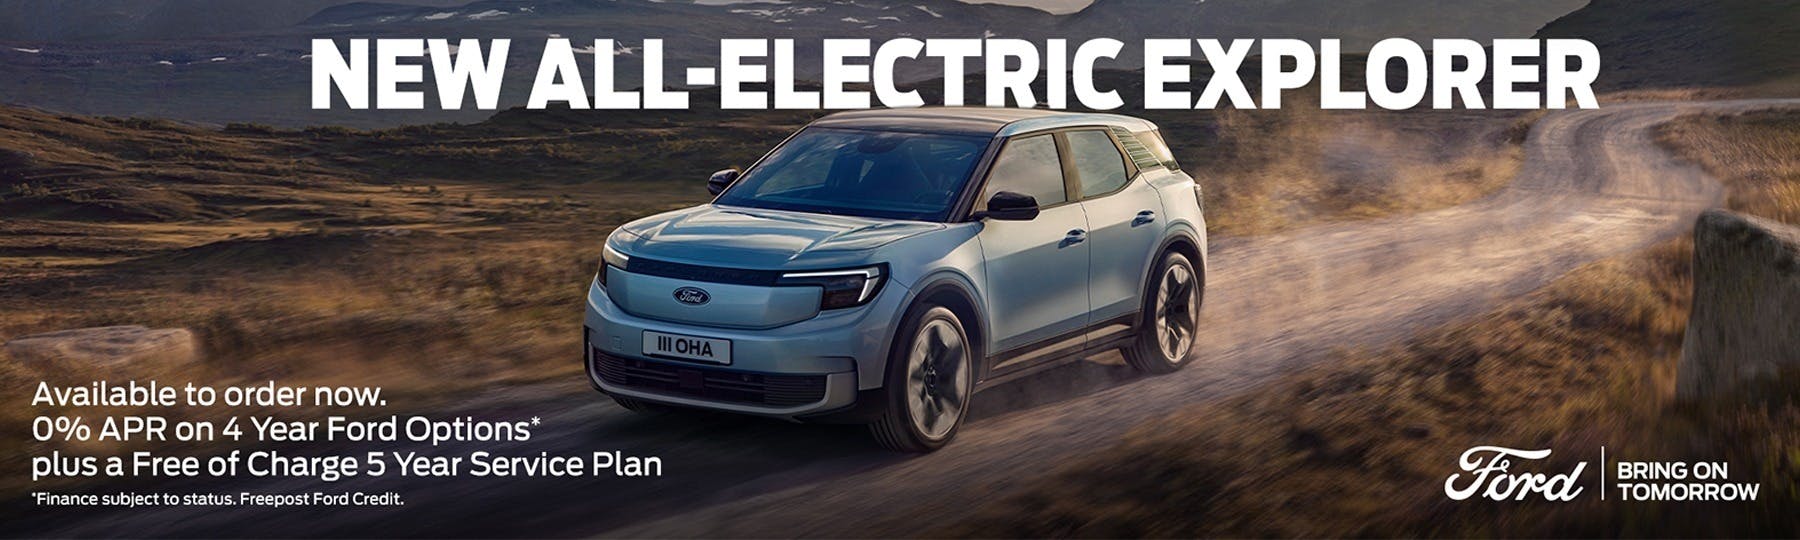 New All-Electric Ford Explorer New Car Offer